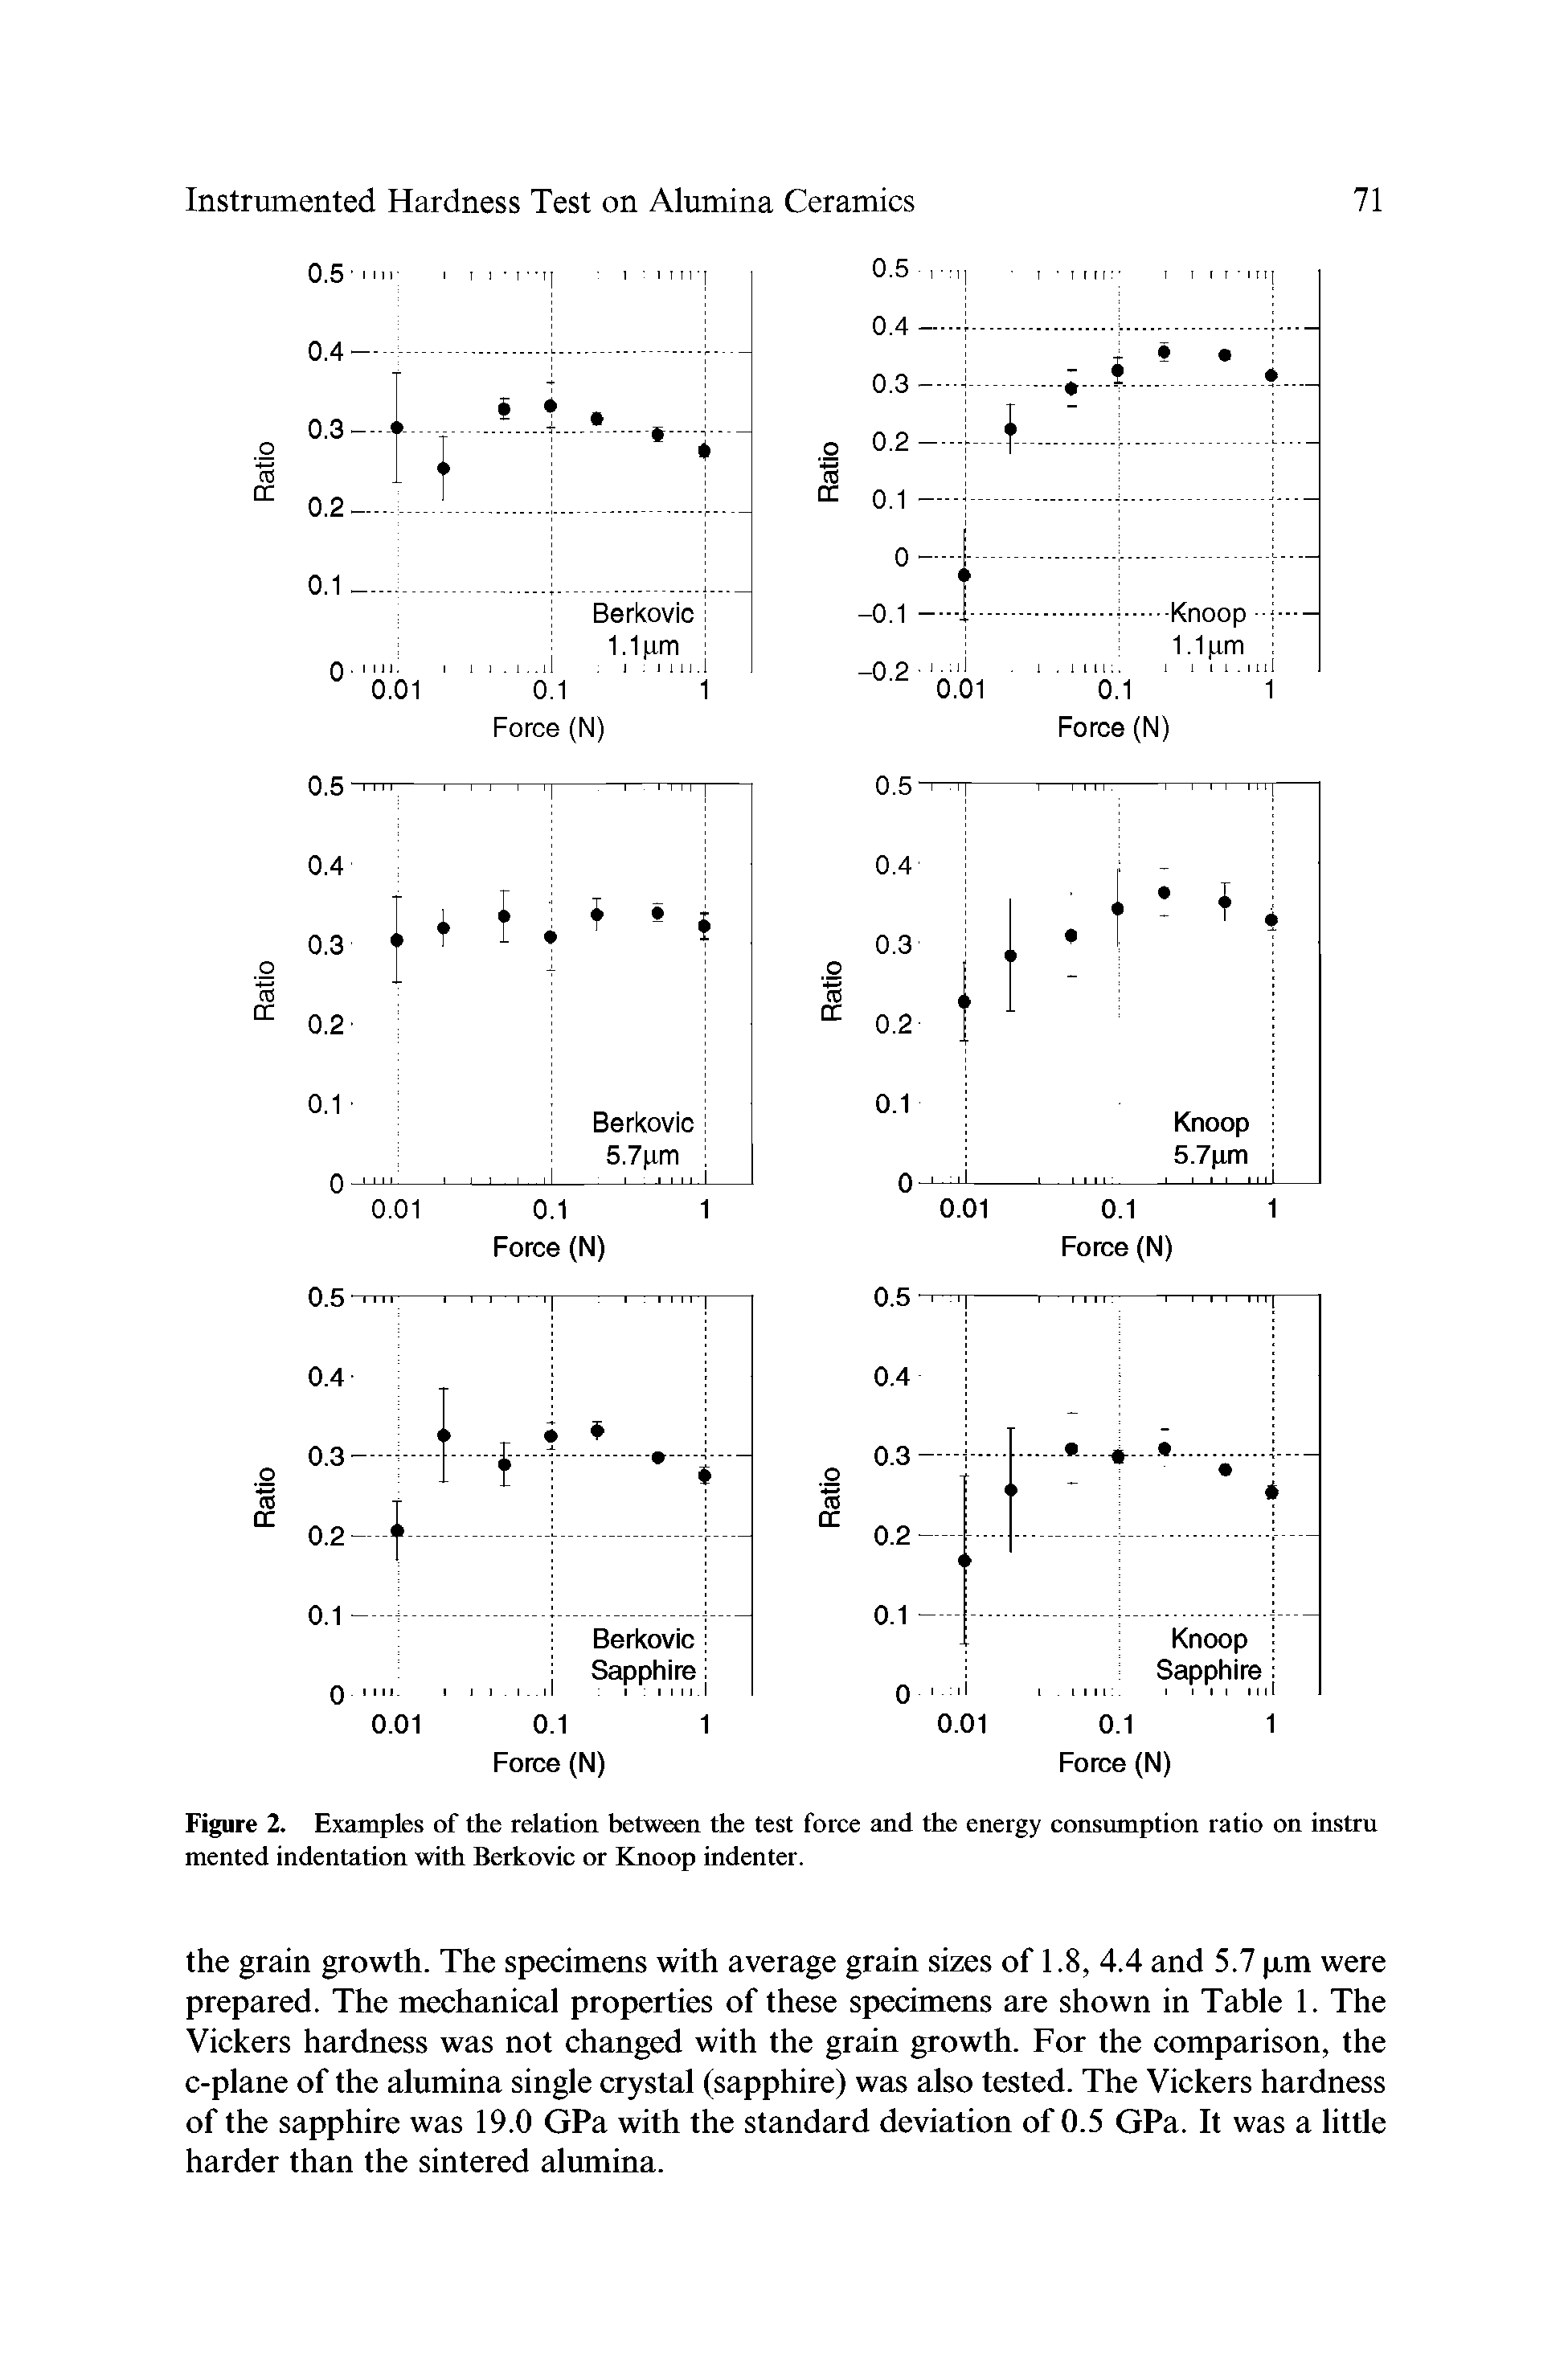 Figure 2. Examples of the relation between the test force and the energy consumption ratio on instru mented indentation with Berkovic or Knoop indenter.